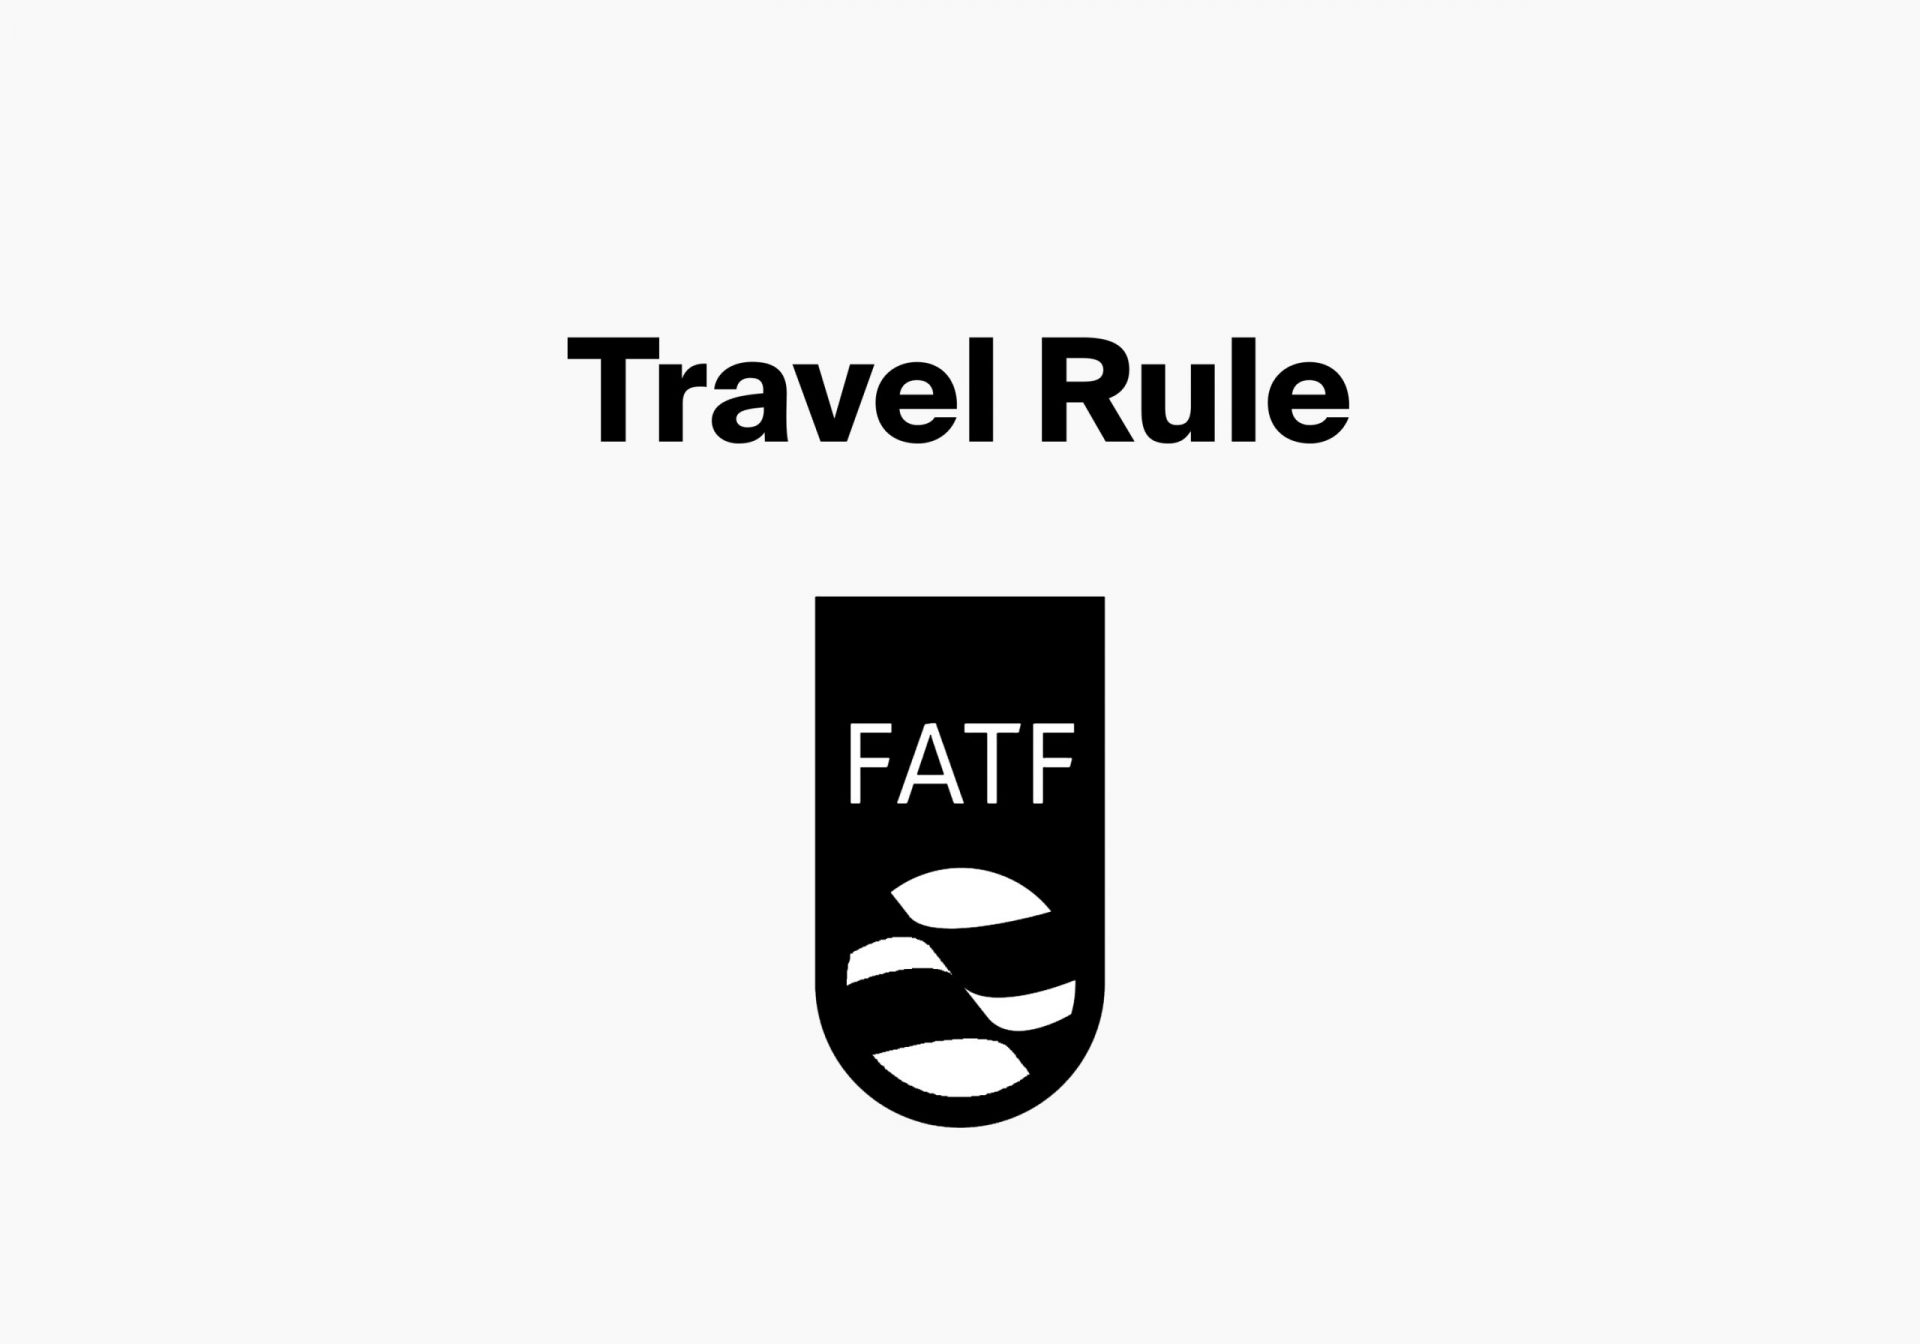 What is the Travel Rule?